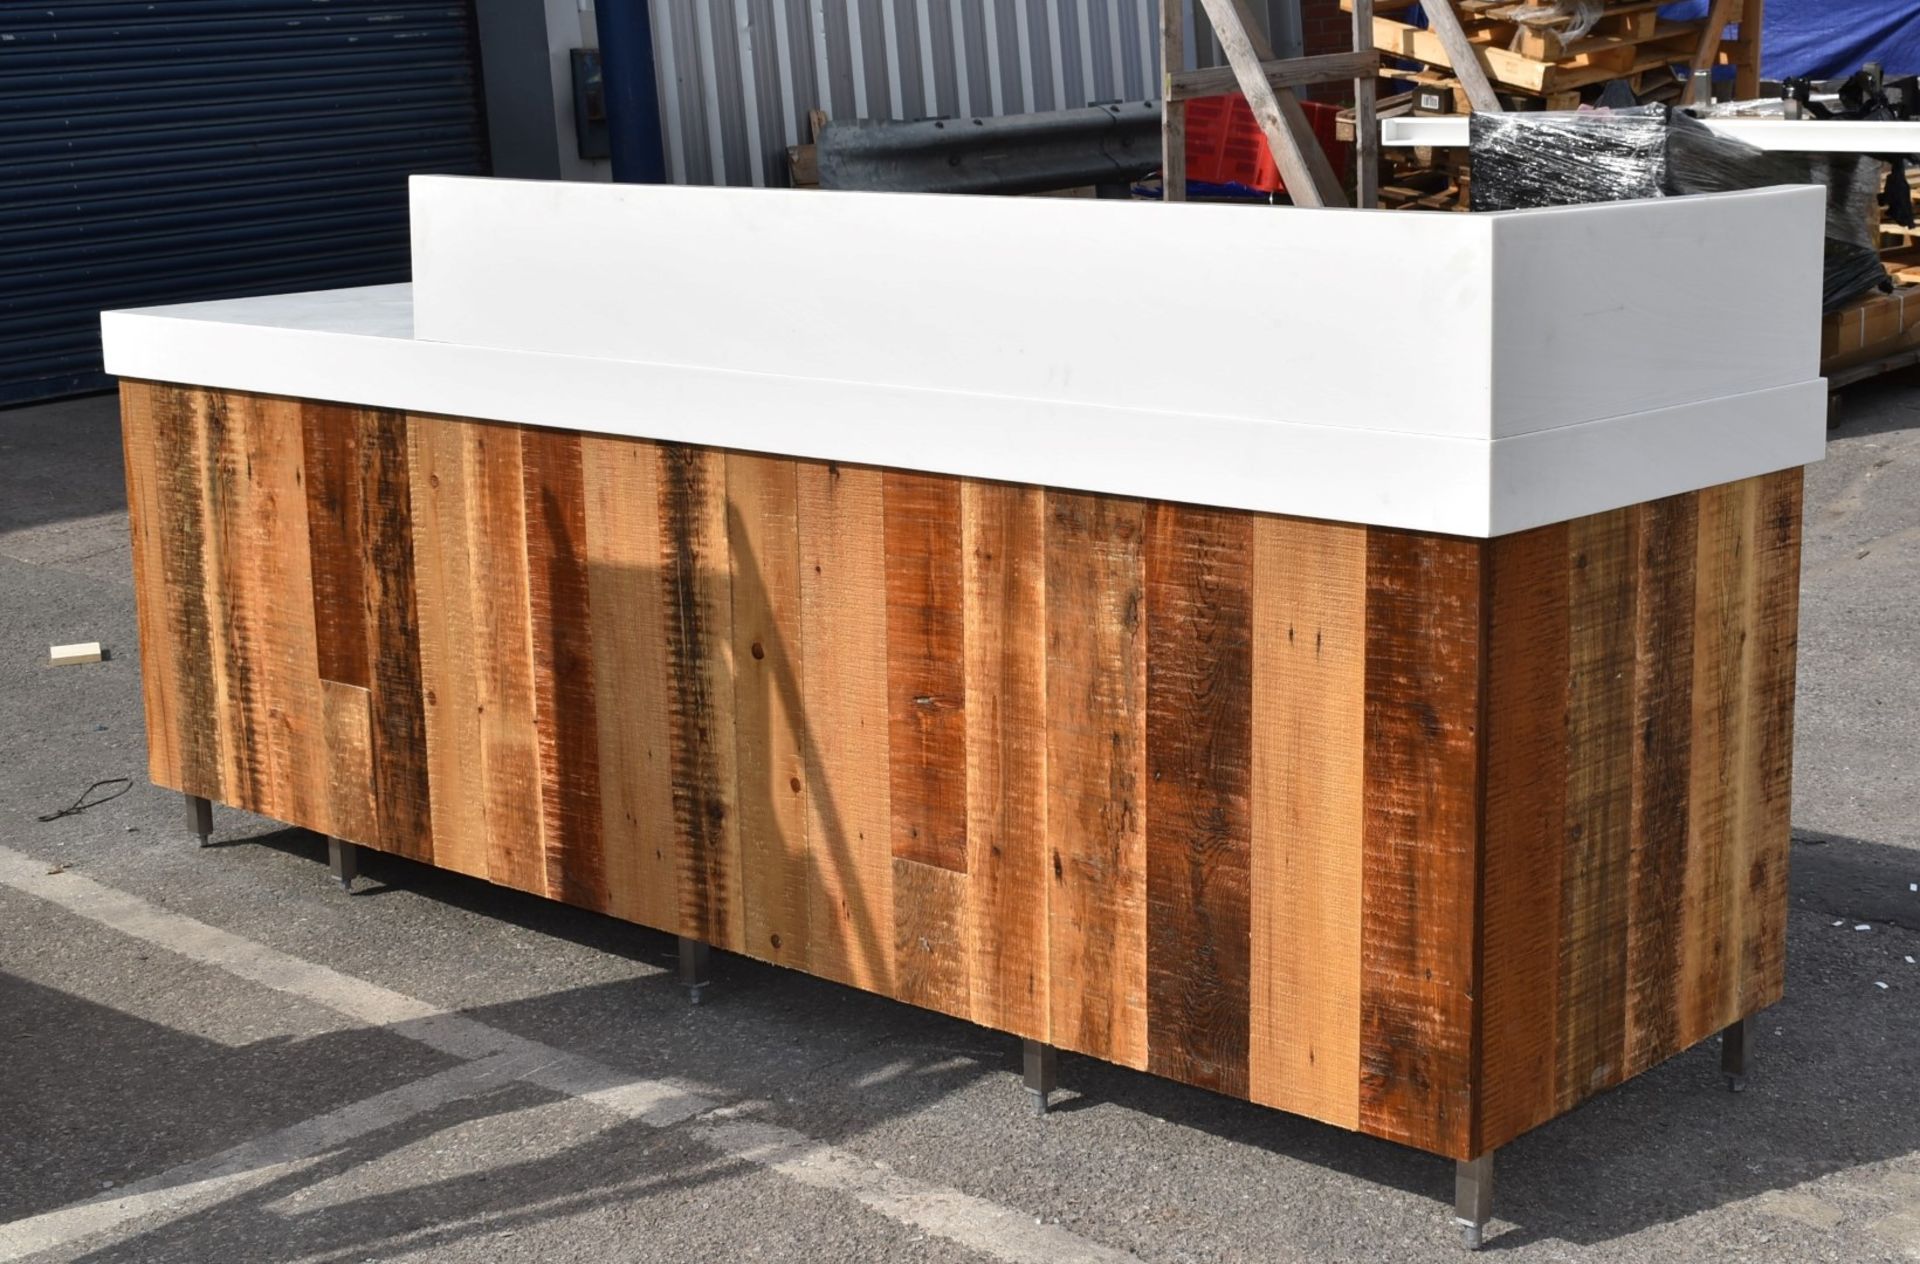 1 x Commercial Coffee Shop Preperation Counter With Natural Wooden Fascia, Hard Wearing Hygenic - Image 19 of 21